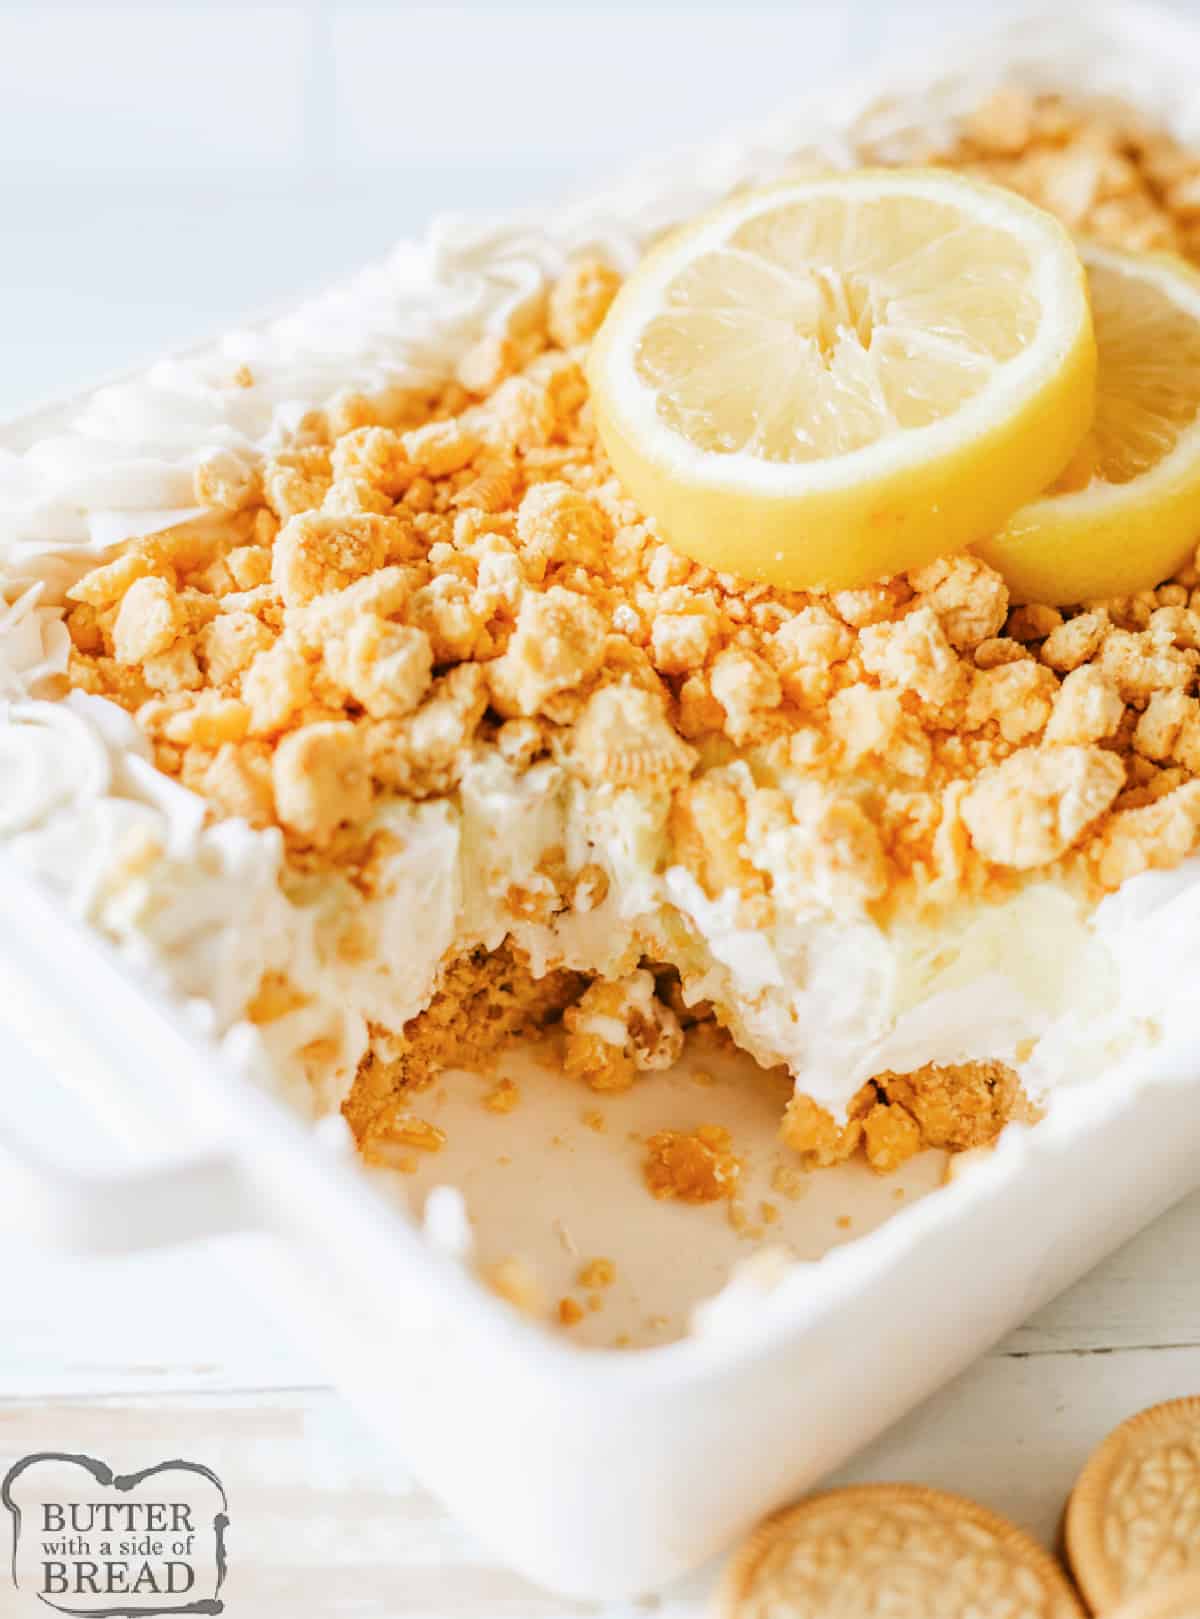 Lemon Oreo Lasagna is a no-bake layered dessert that is easy to make! This delicious lemon dessert recipe is made with Lemon Oreos, whipped topping, cheesecake pudding, lemon pie filling, and a few other basic ingredients.